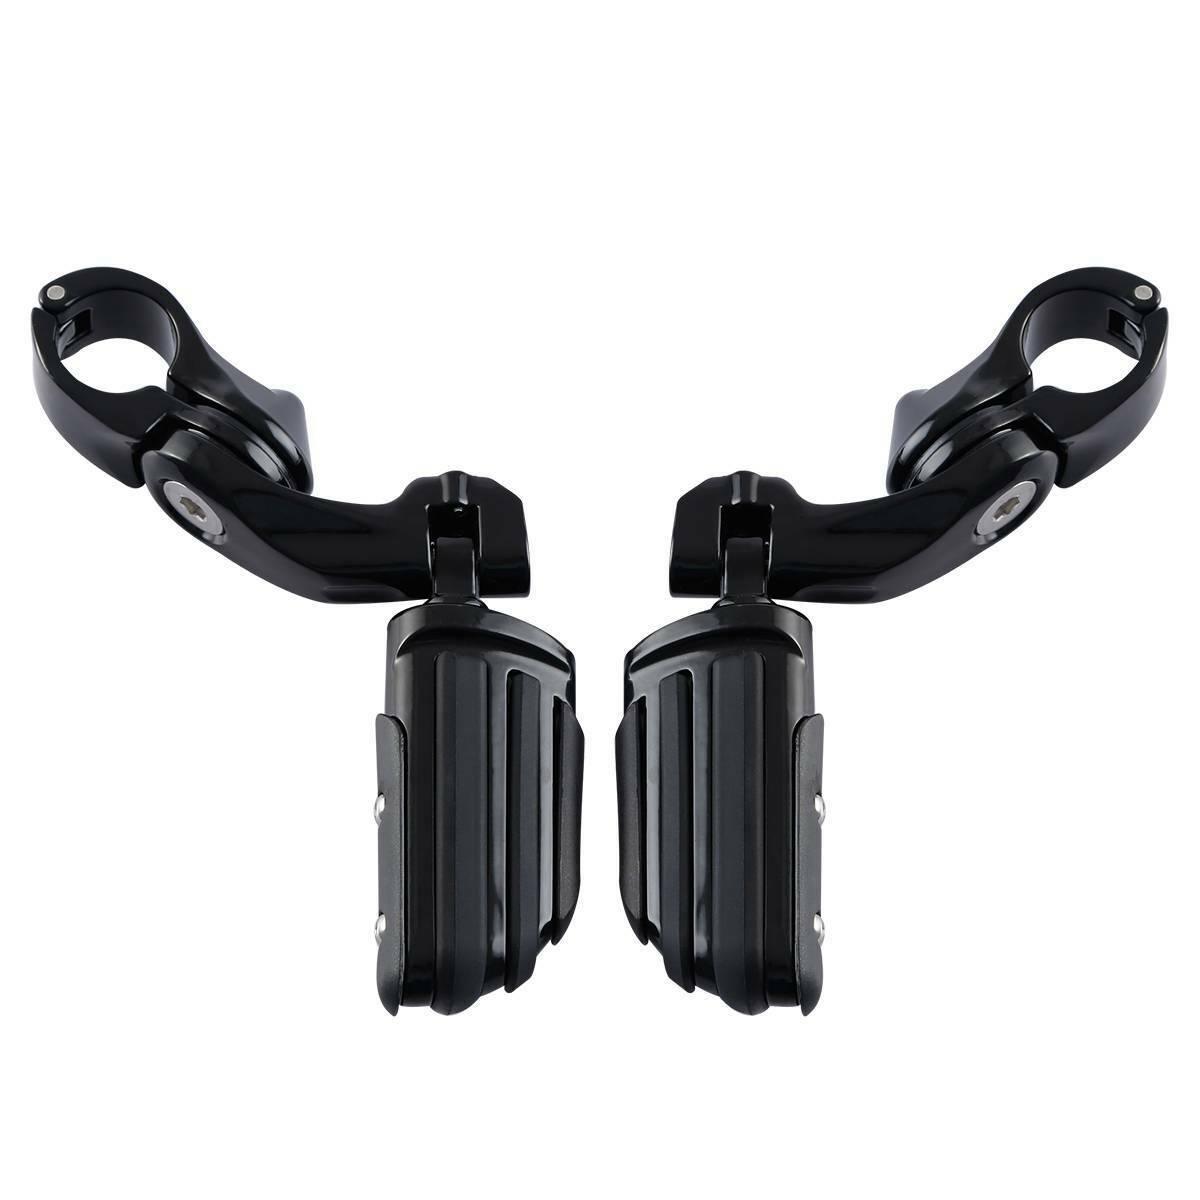 1 1/4'' Adjustable Foot pegs Short Angled Fit For Harley Touring Sportster XL883 - Moto Life Products